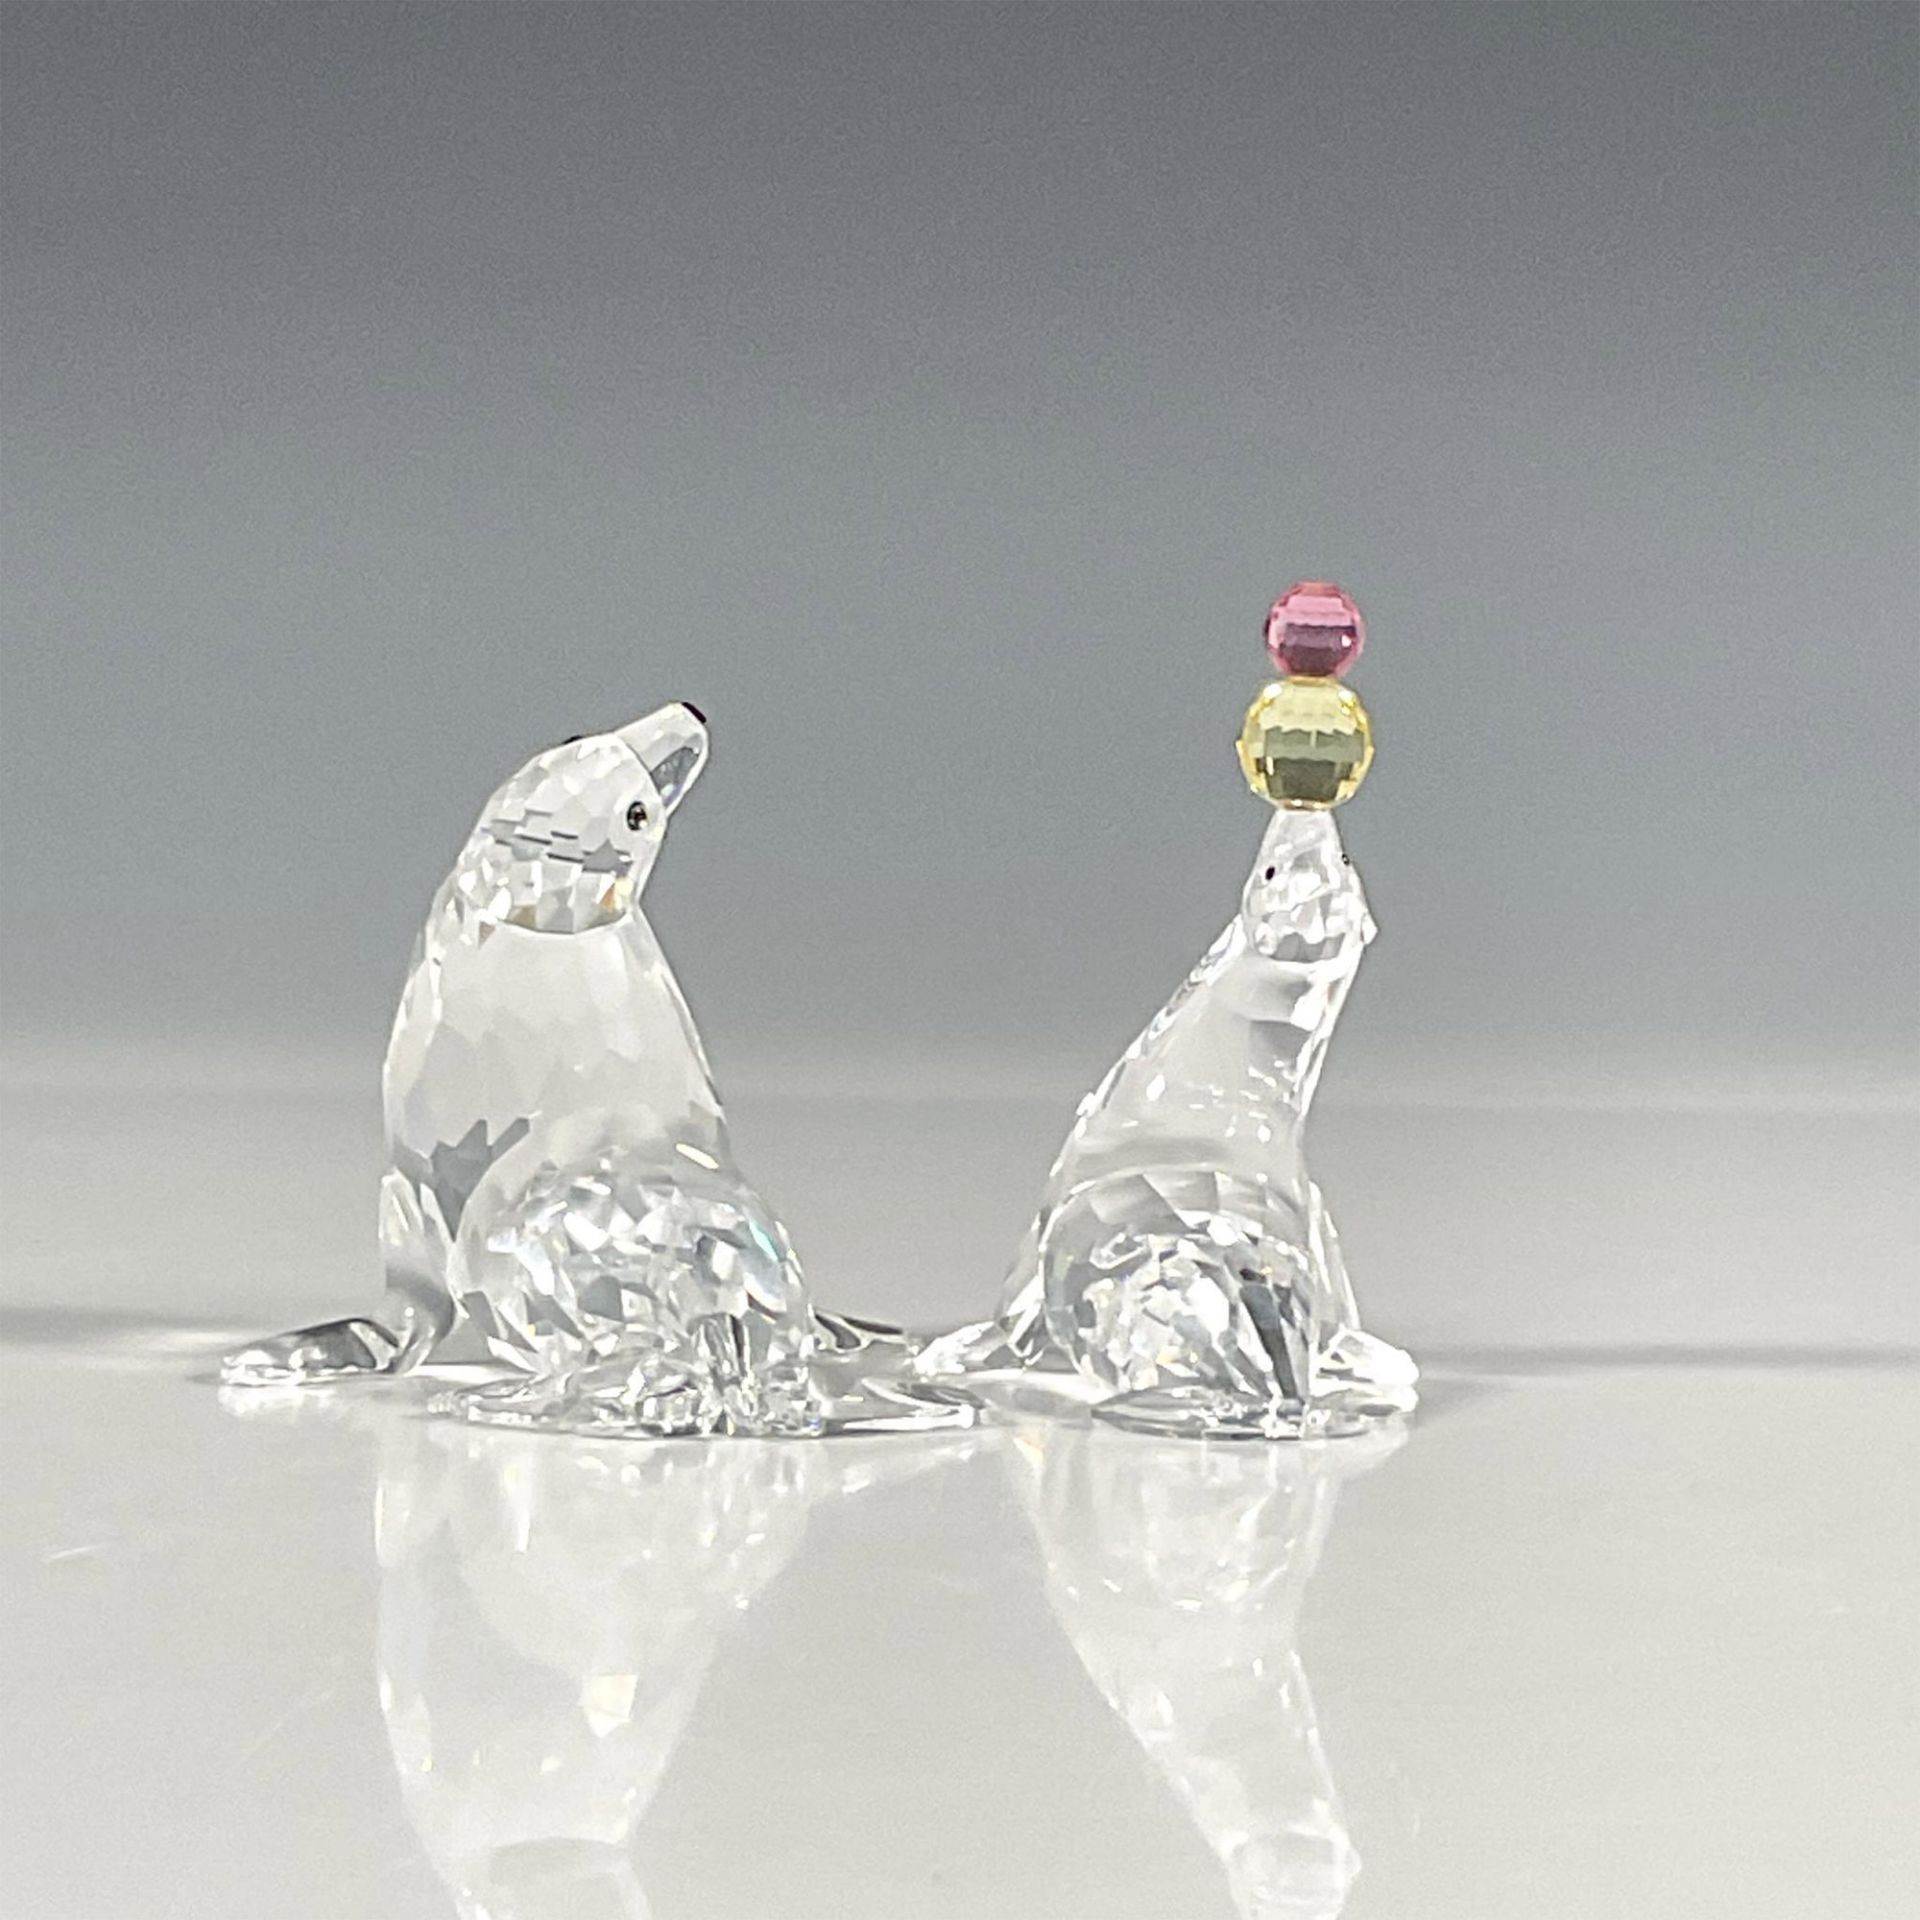 2pc Swarovski Silver Crystal Figurines, Seal and Sealion - Image 4 of 5